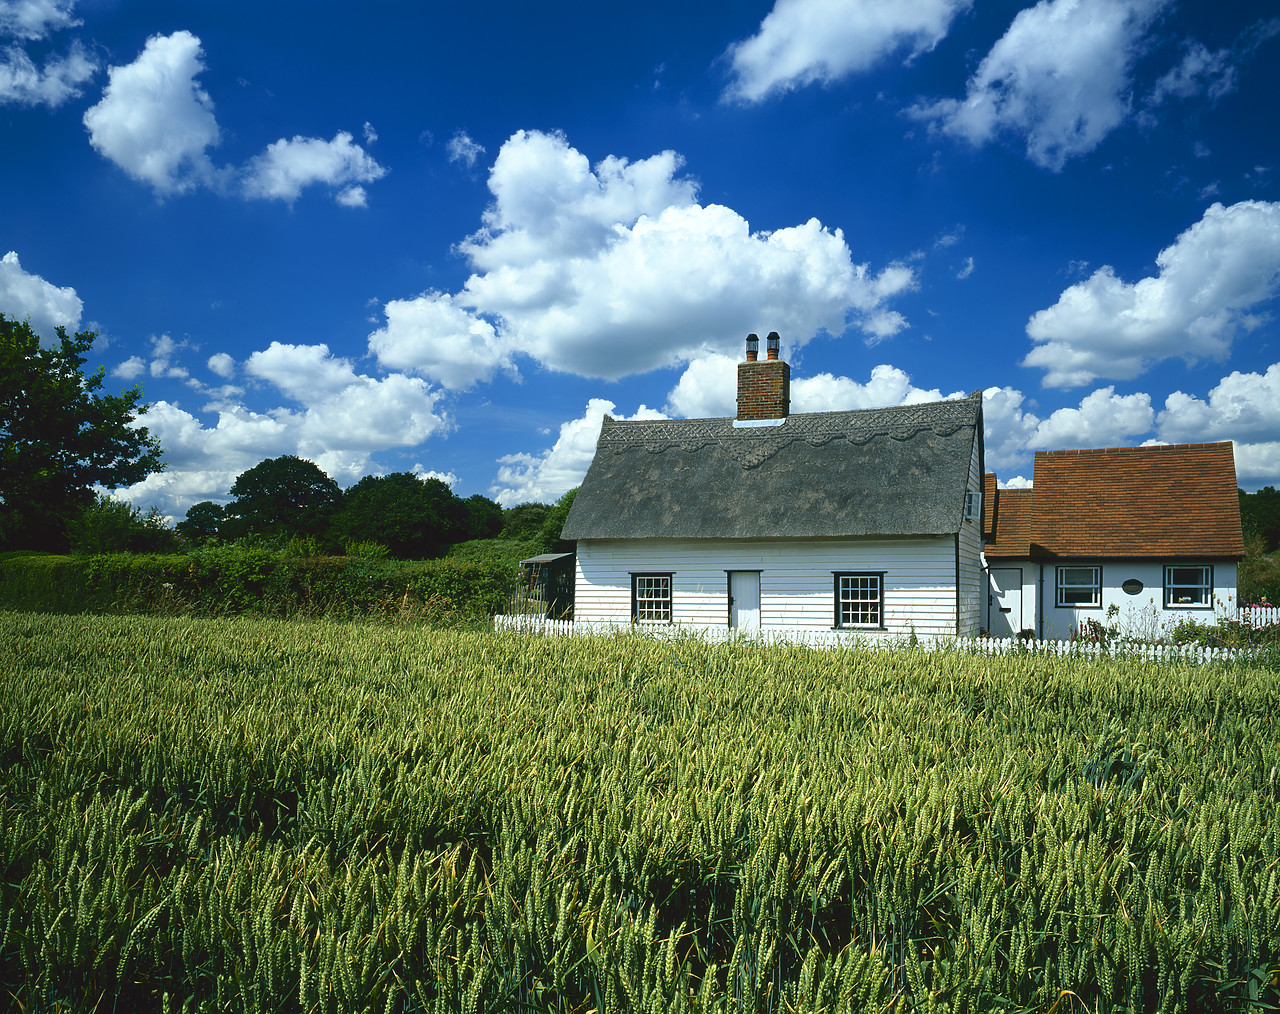 #040159-3 - Thatched Cottage & Field of Wheat, near Wissington, Suffolk, England